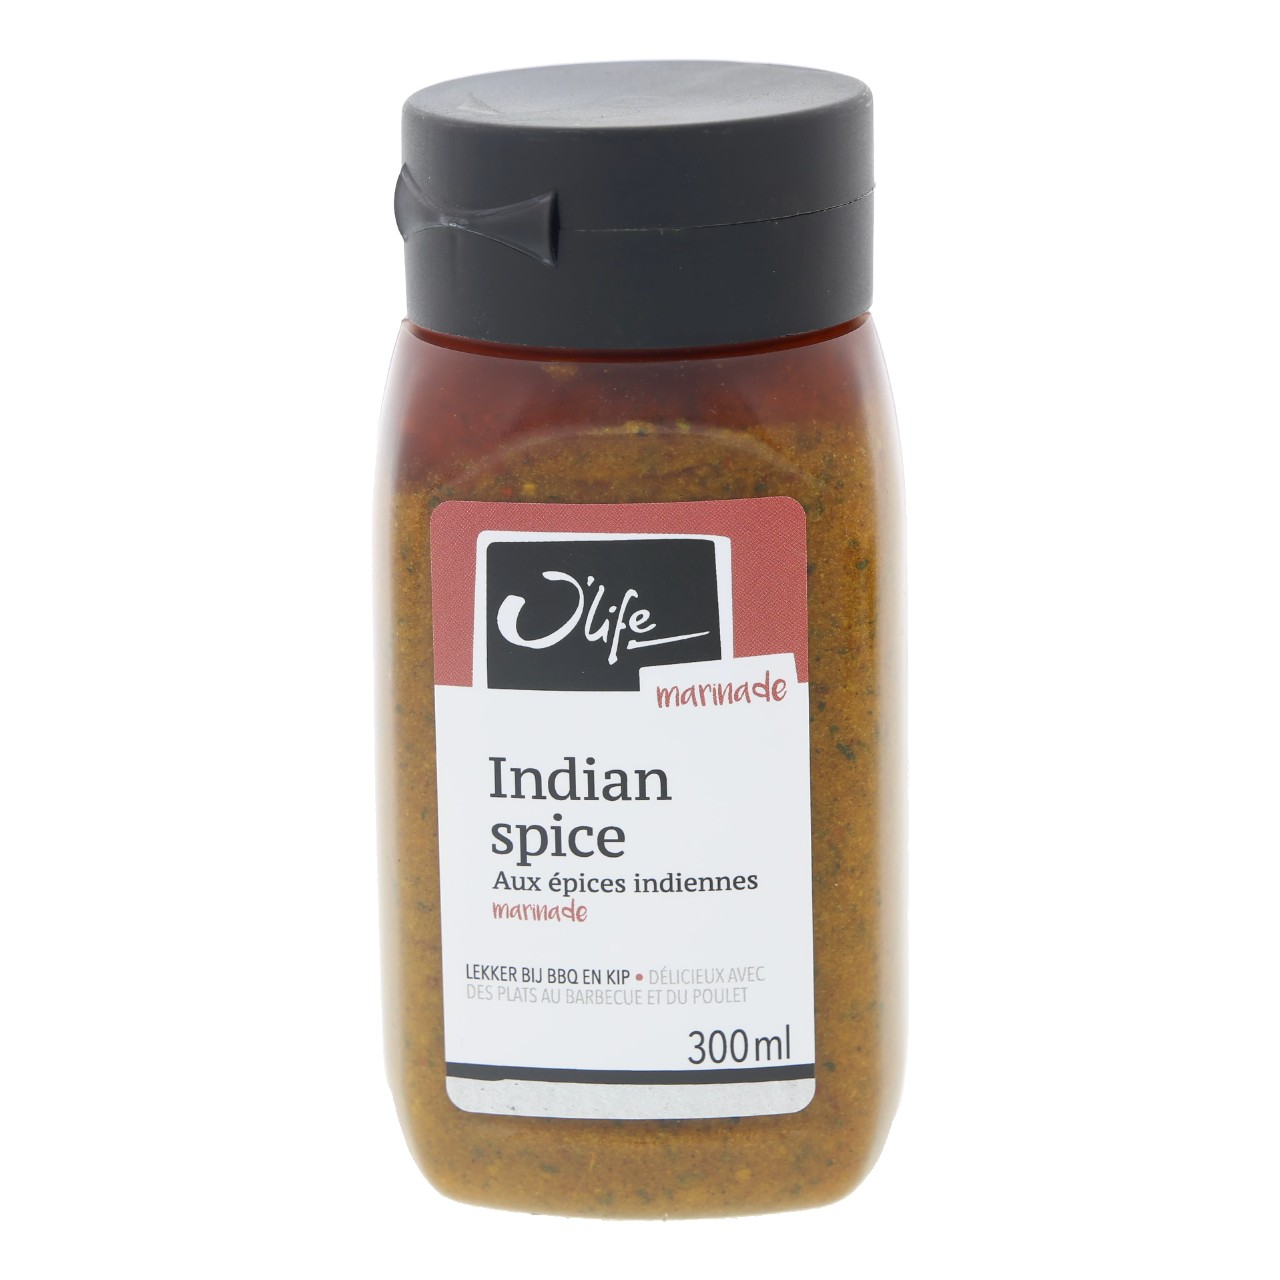 Indian spice marinade